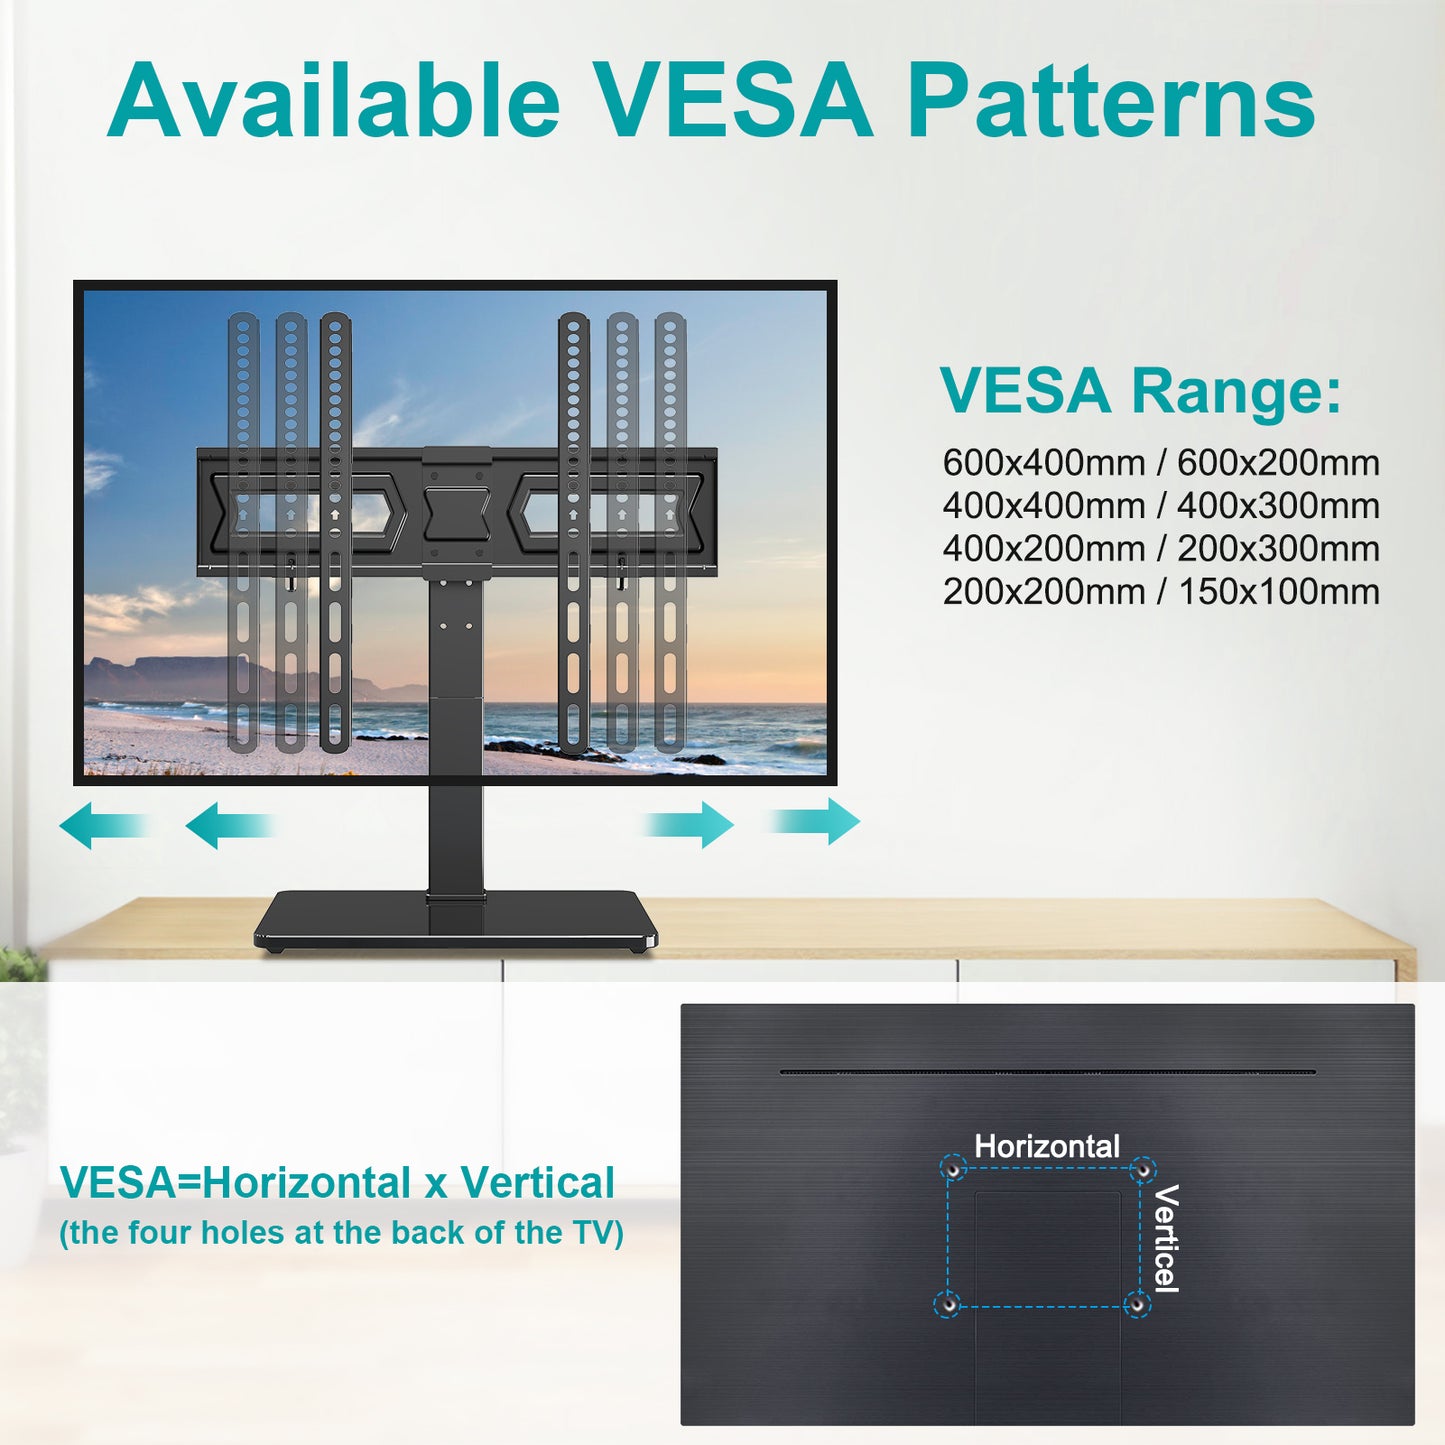 Universal TV Stand, Swivel TV Stand Base Fits Most 37 to 70 Inch LCD LED Screens, 9 Levels Height Adjustable Table Top TV Stand with Tempered Glass Base, Holds up to 88lbs, Max VESA 600x400mm